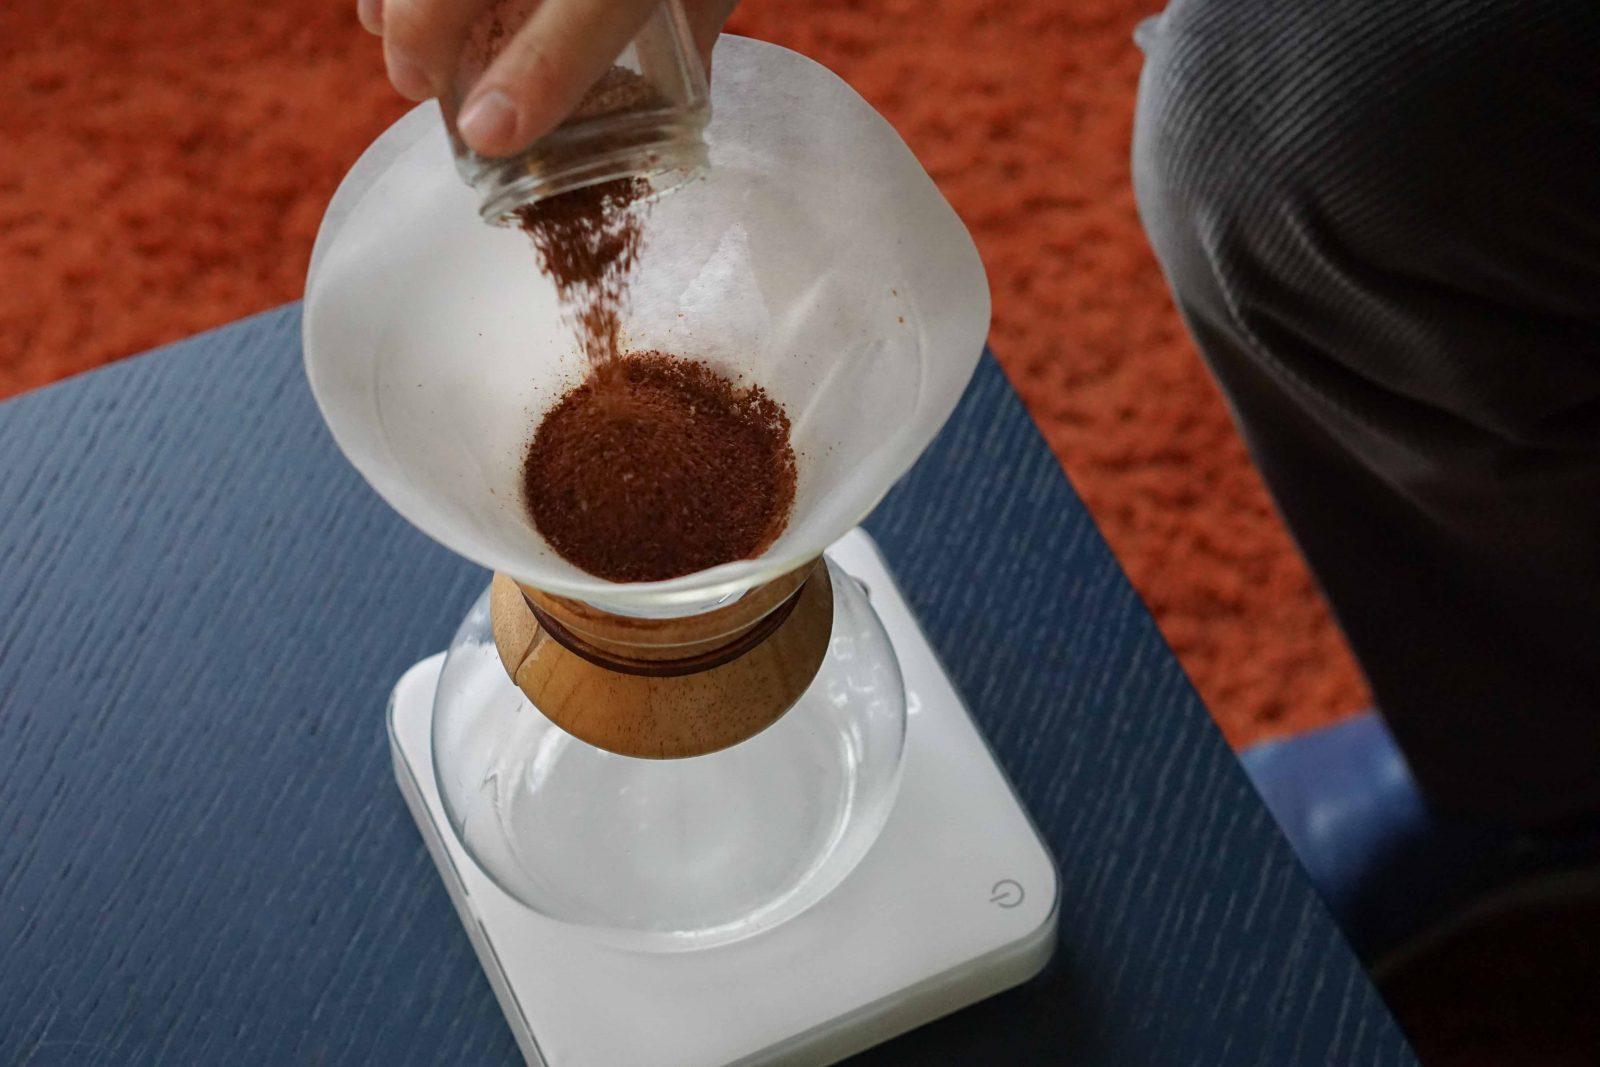 Load up your chemex